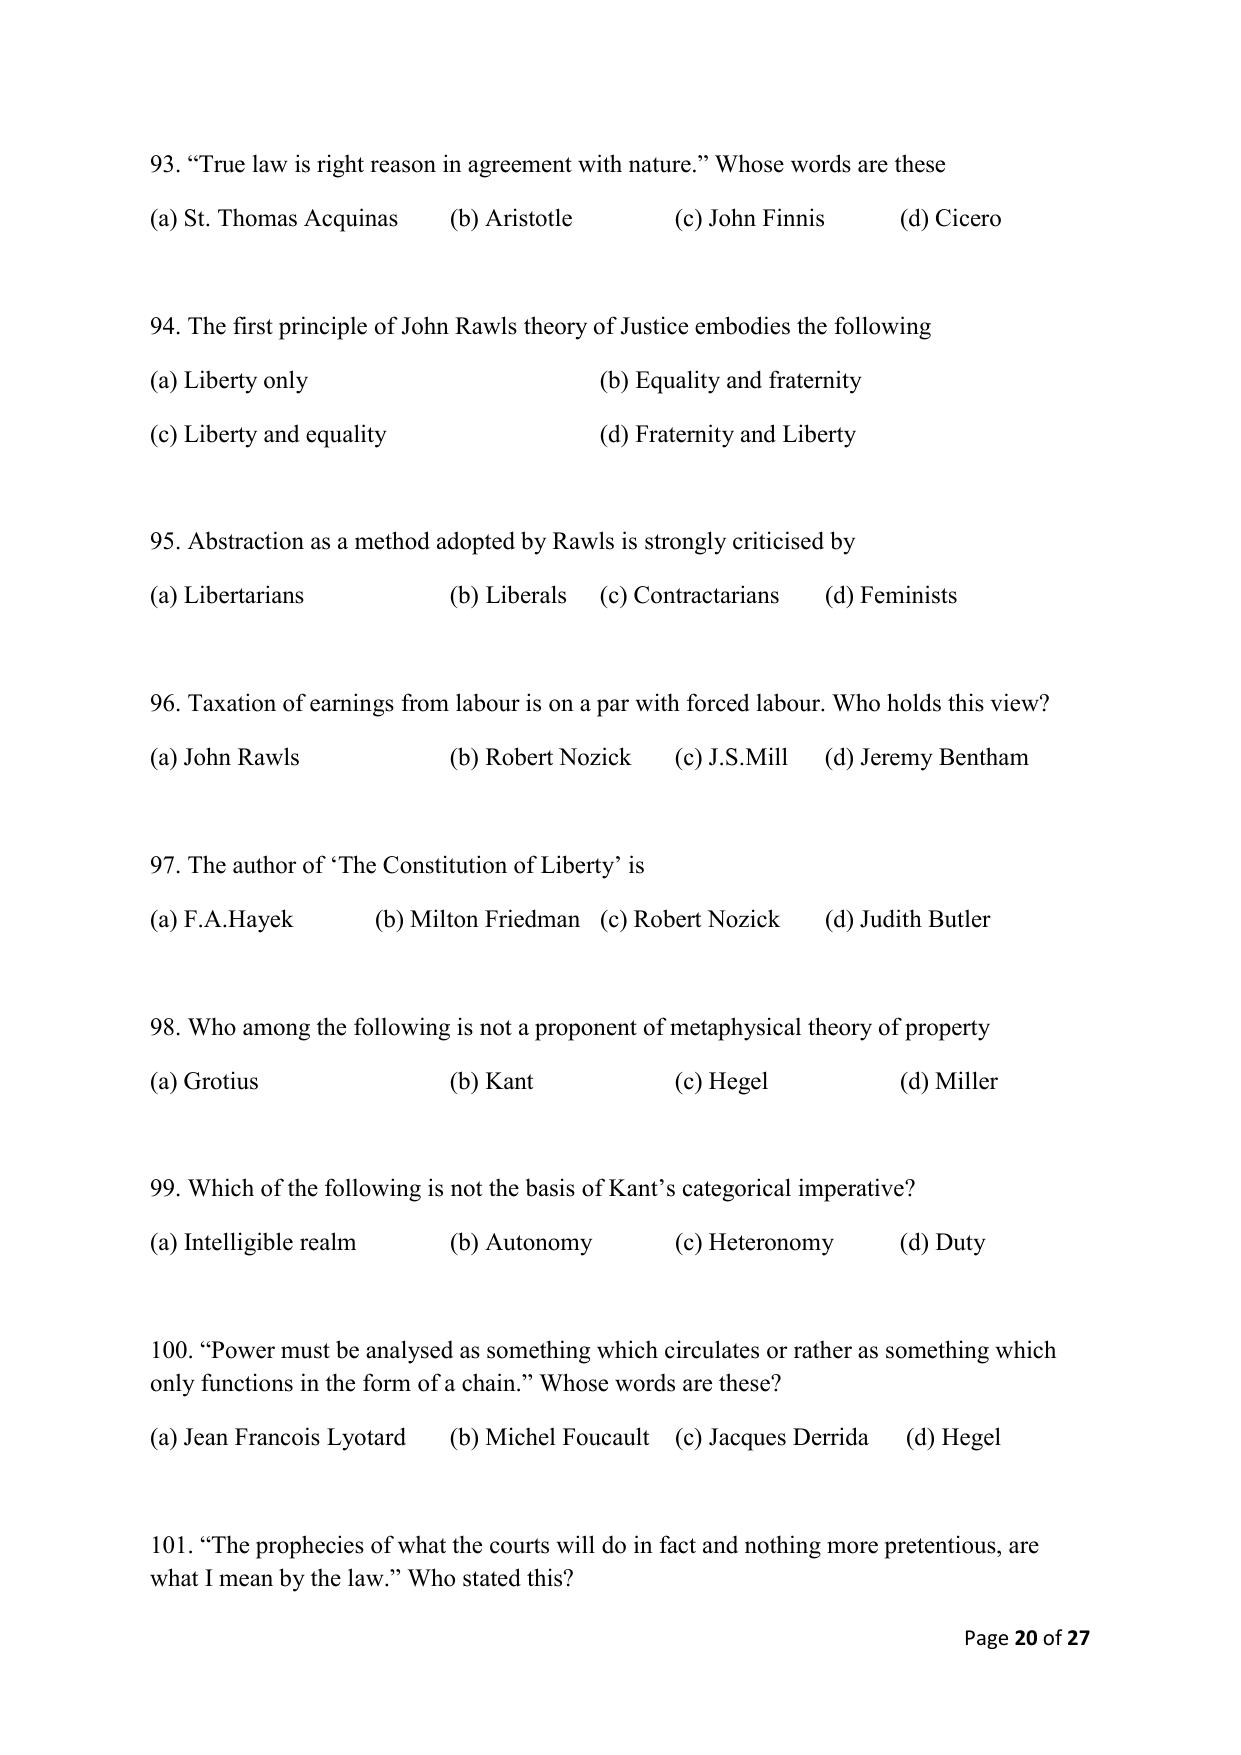 AILET 2020 Question Paper for LLM - Page 20